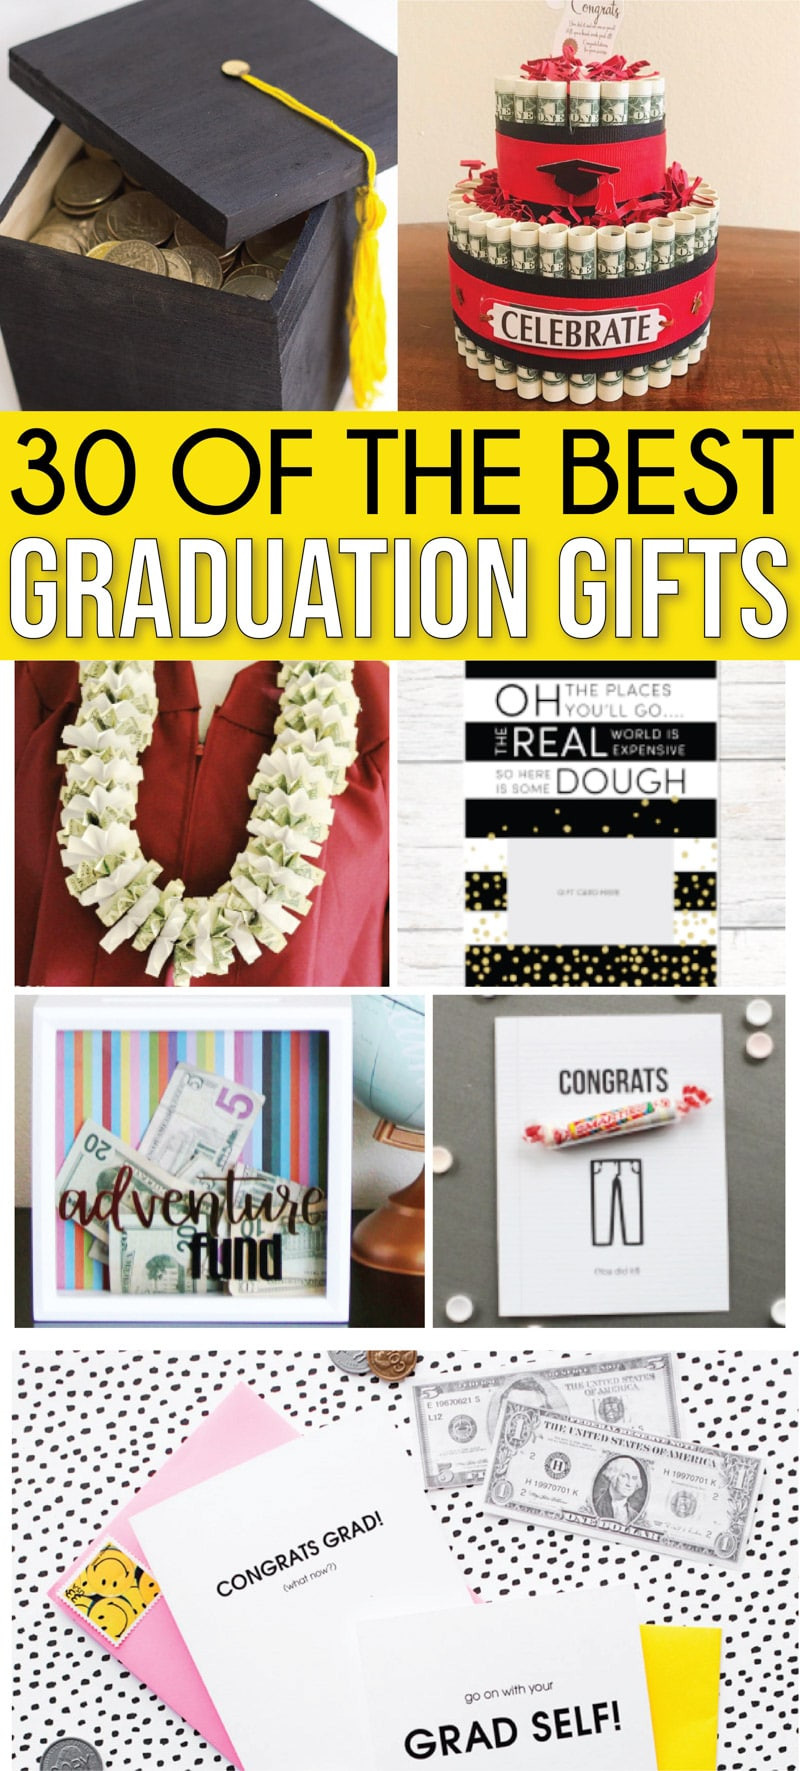 Gift Ideas For Graduation From University
 30 Awesome High School Graduation Gifts Graduates Actually